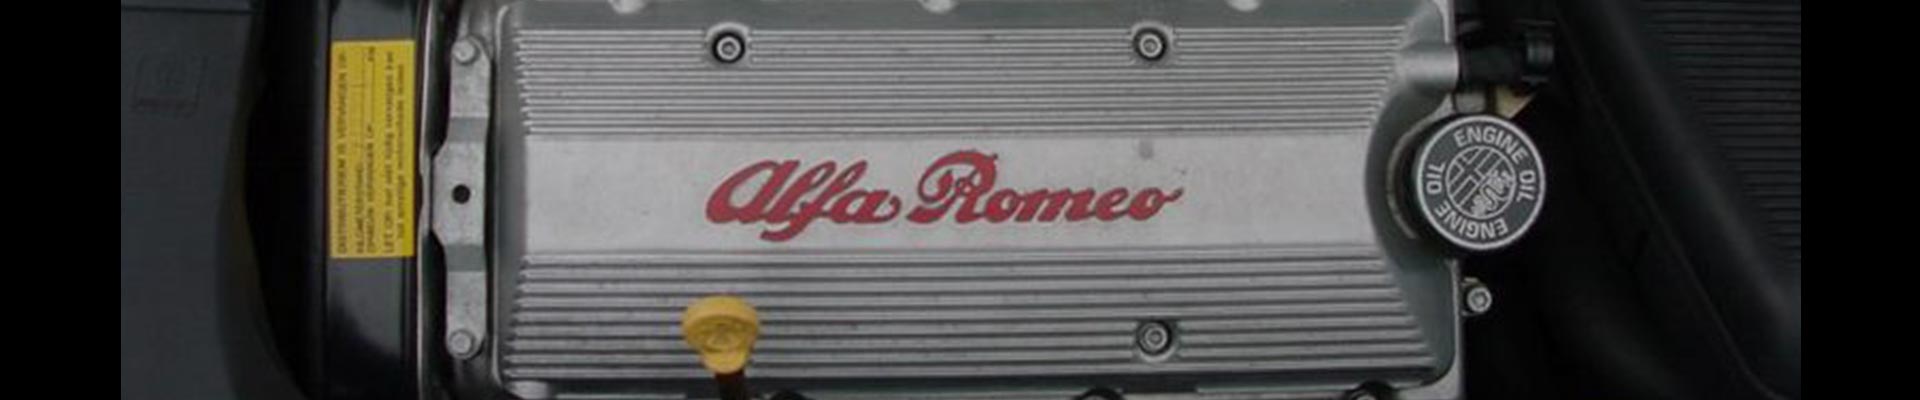 Shop Replacement 1989 Alfa Romeo Milano Parts with Discounted Price on the Net